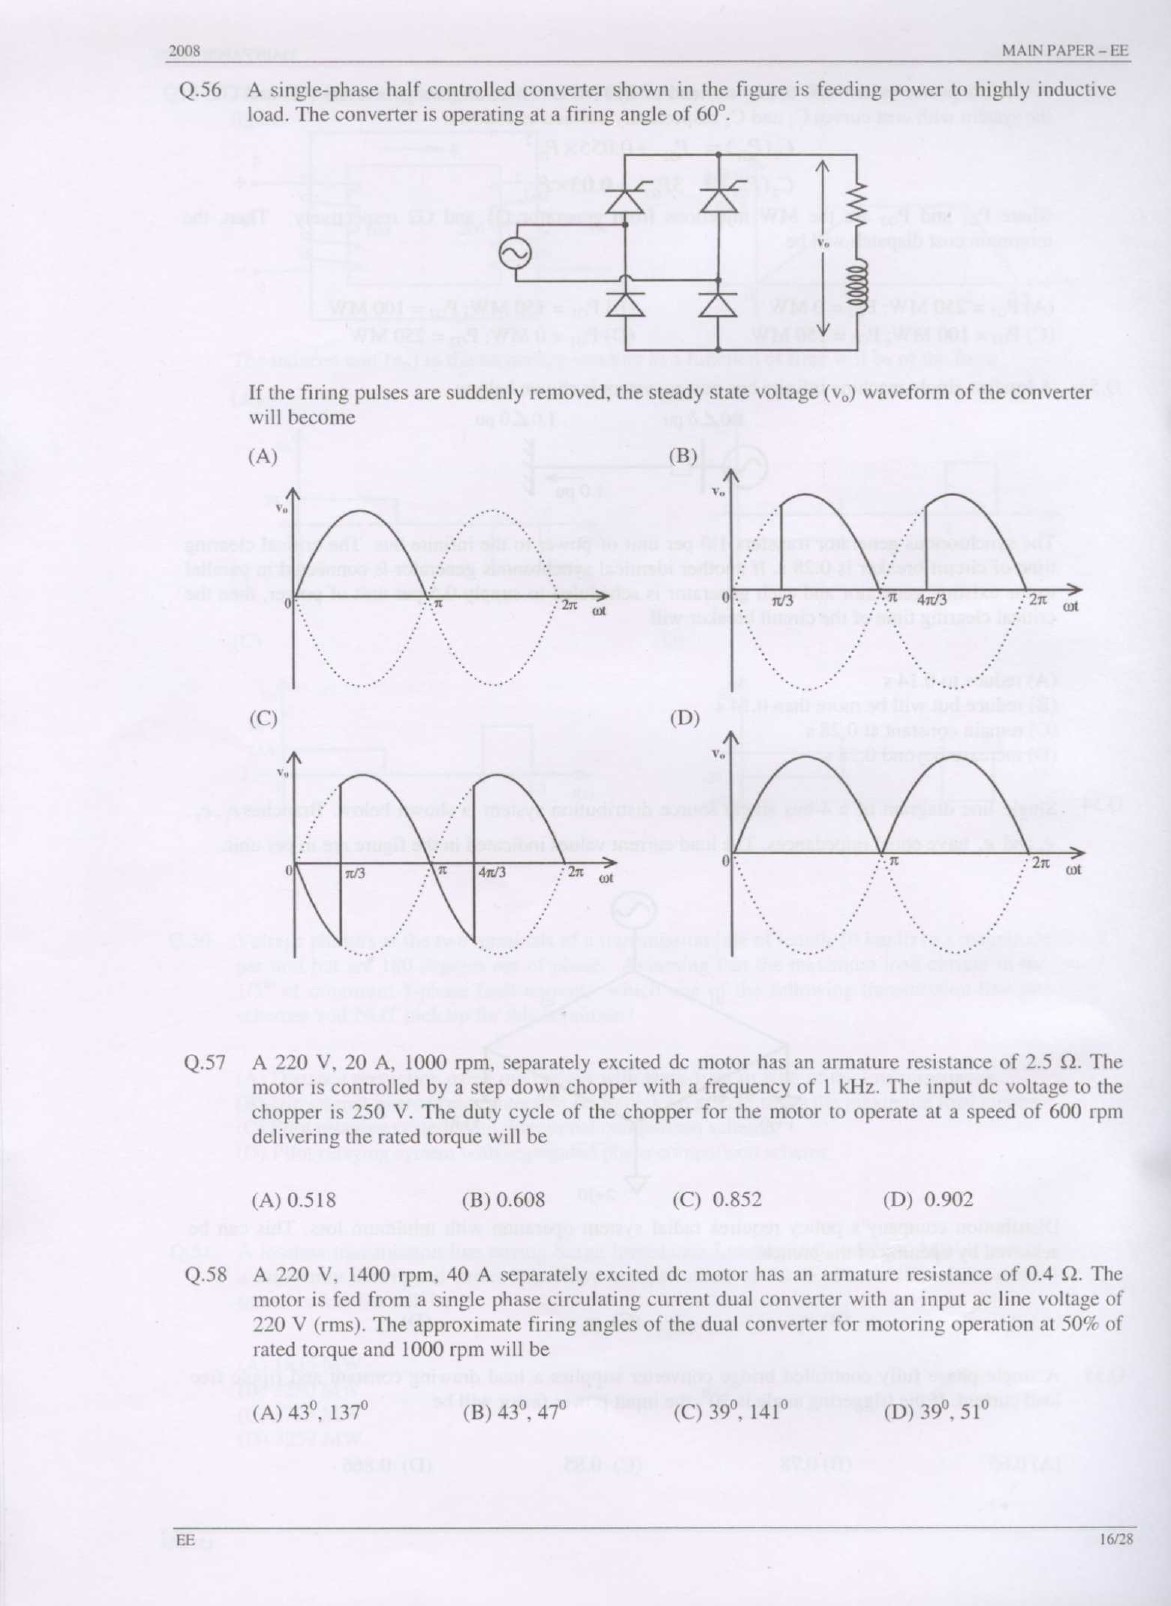 GATE Exam Question Paper 2008 Electrical Engineering 16